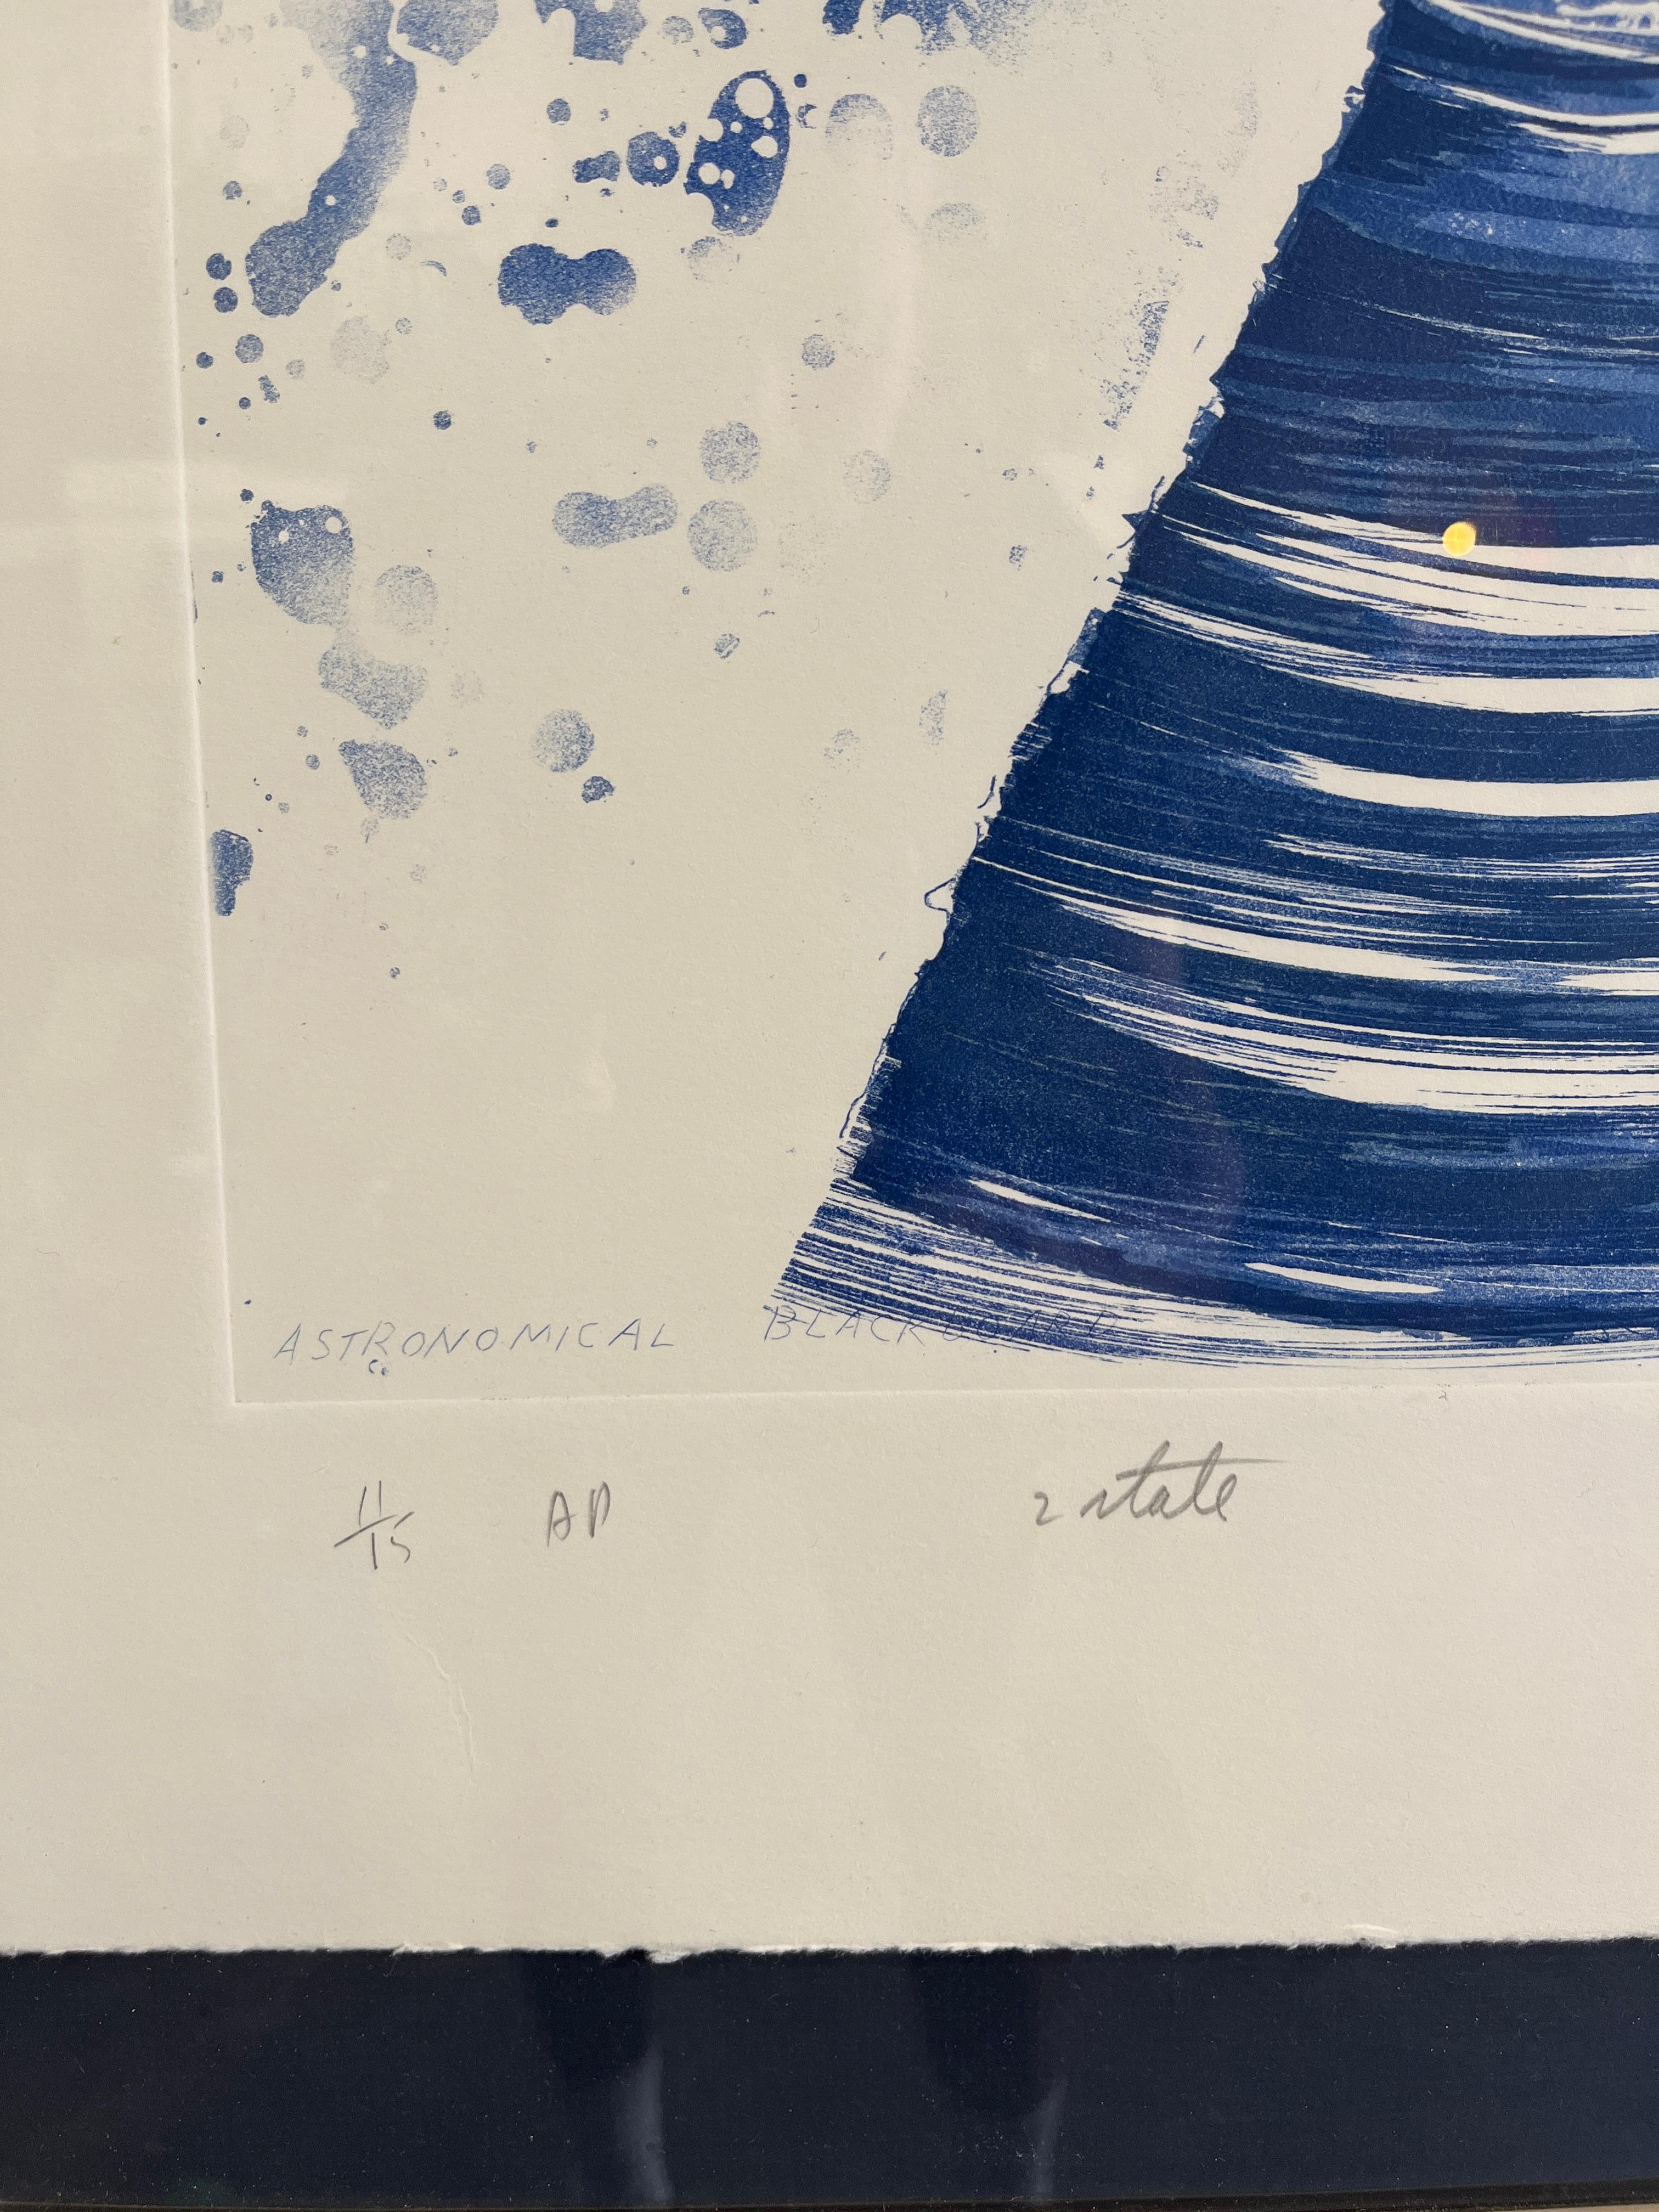 Glass James Rosenquist Etching Astronomical Blackboard AP For Sale